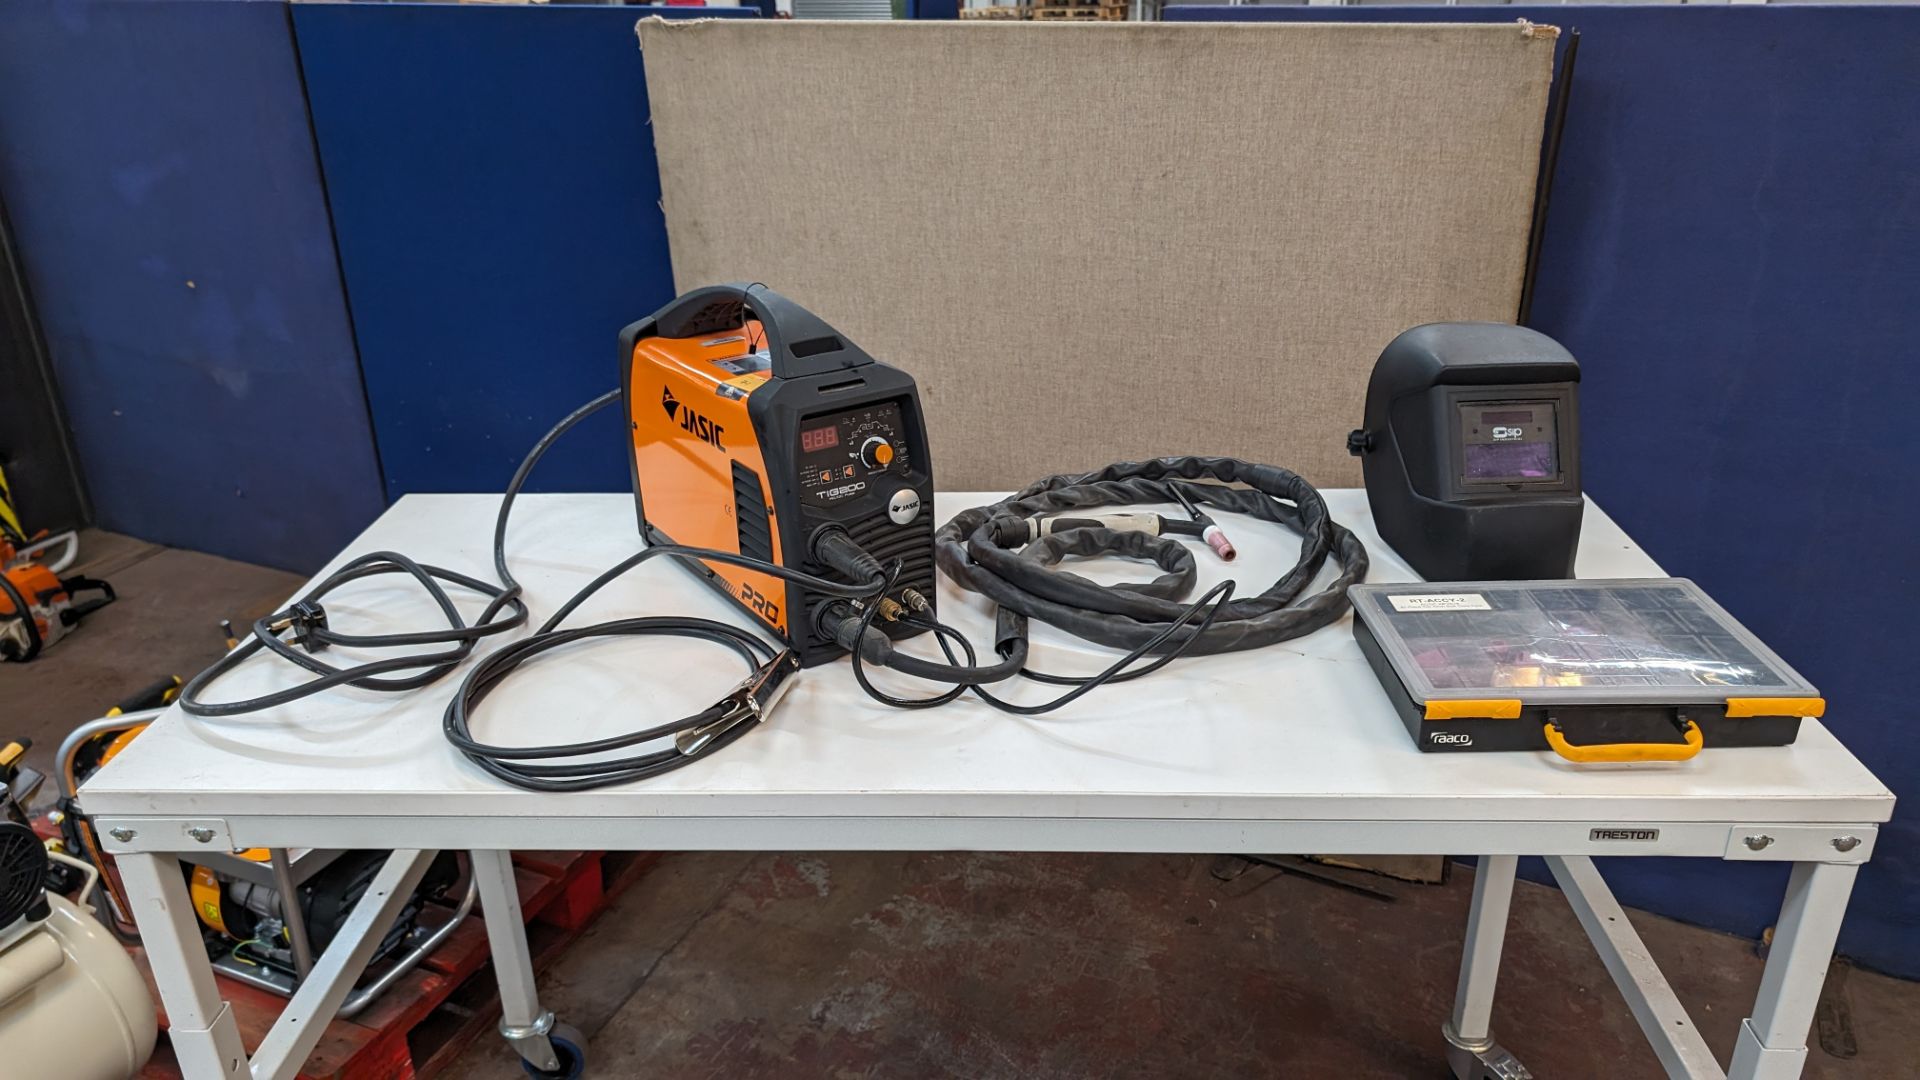 Jasic Pro tig 200 AC/DC pulse welder, including welding mask, box of consumables & other items as pi